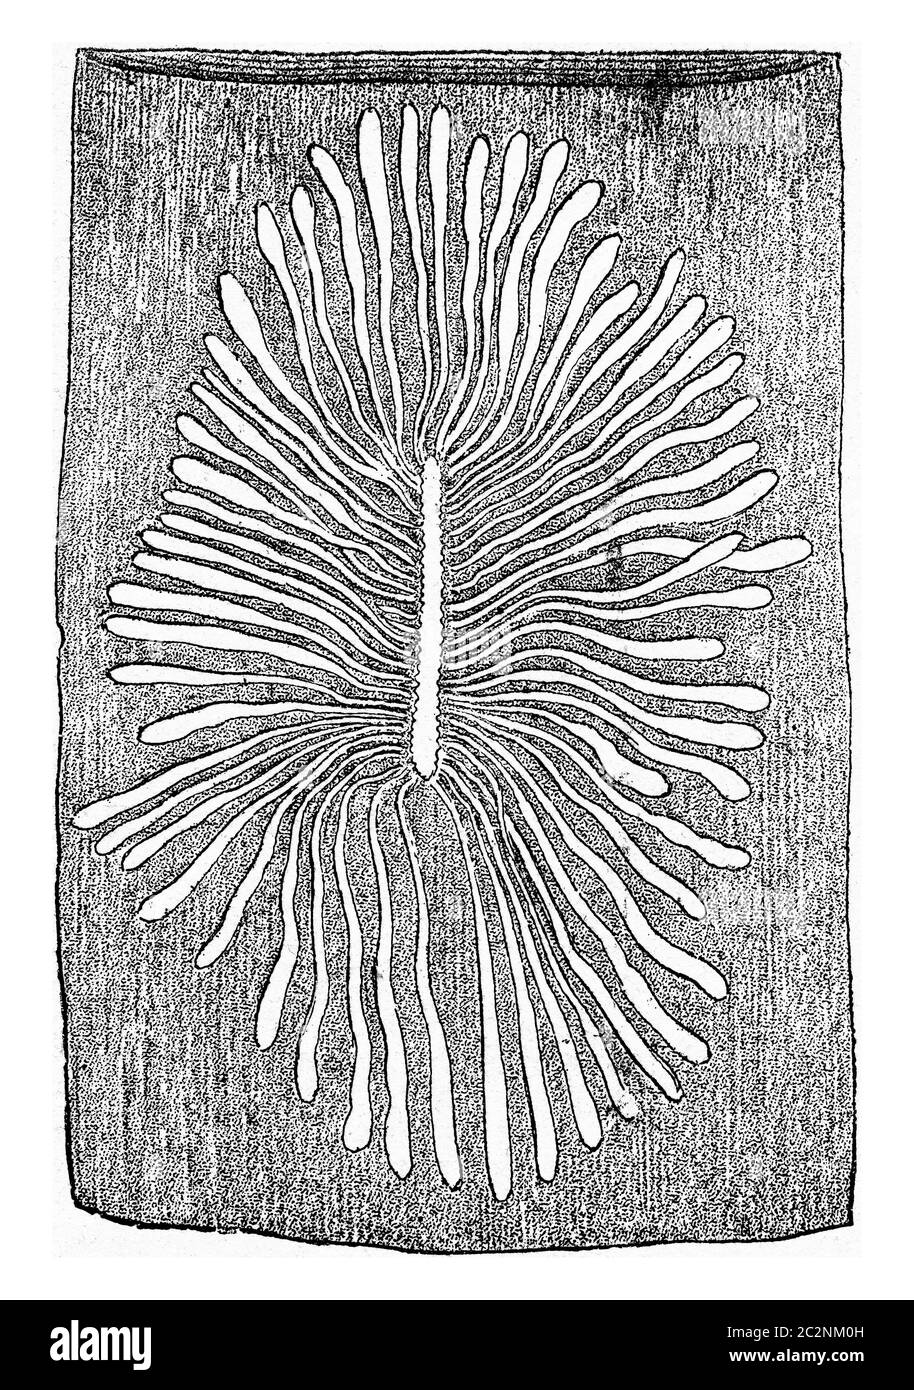 Scolytus multistriatus, egg gallery and larval galleries in the sapwood of elm, vintage engraved illustration. Stock Photo